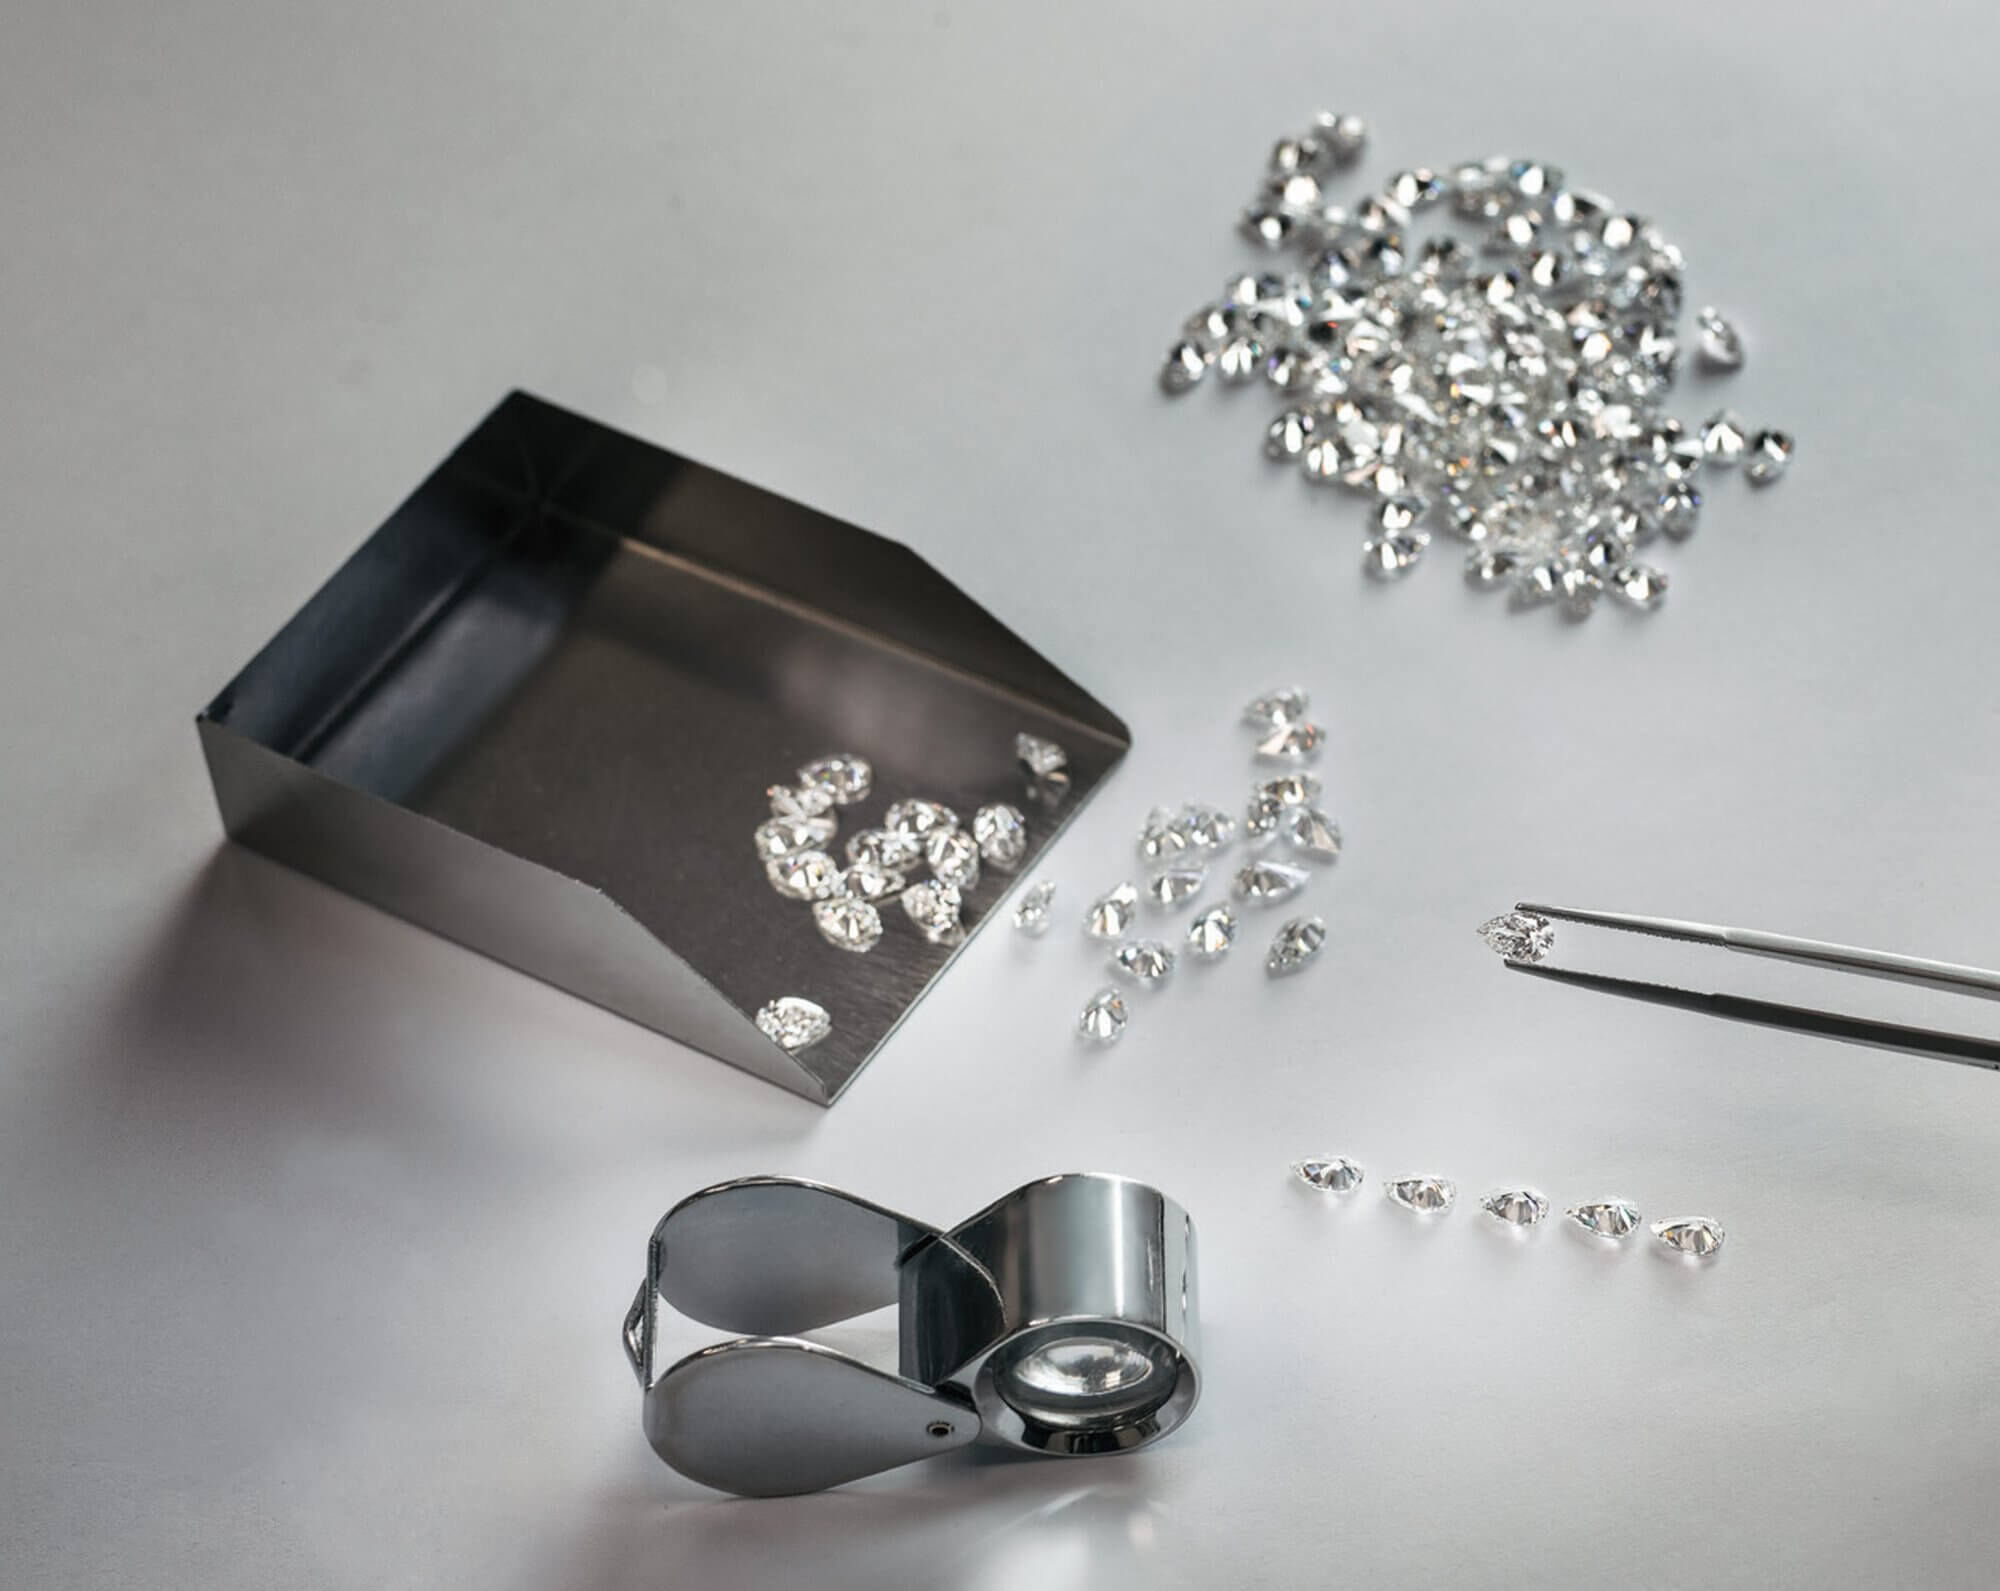 Graff diamond setter lining up diamonds with tools on the table